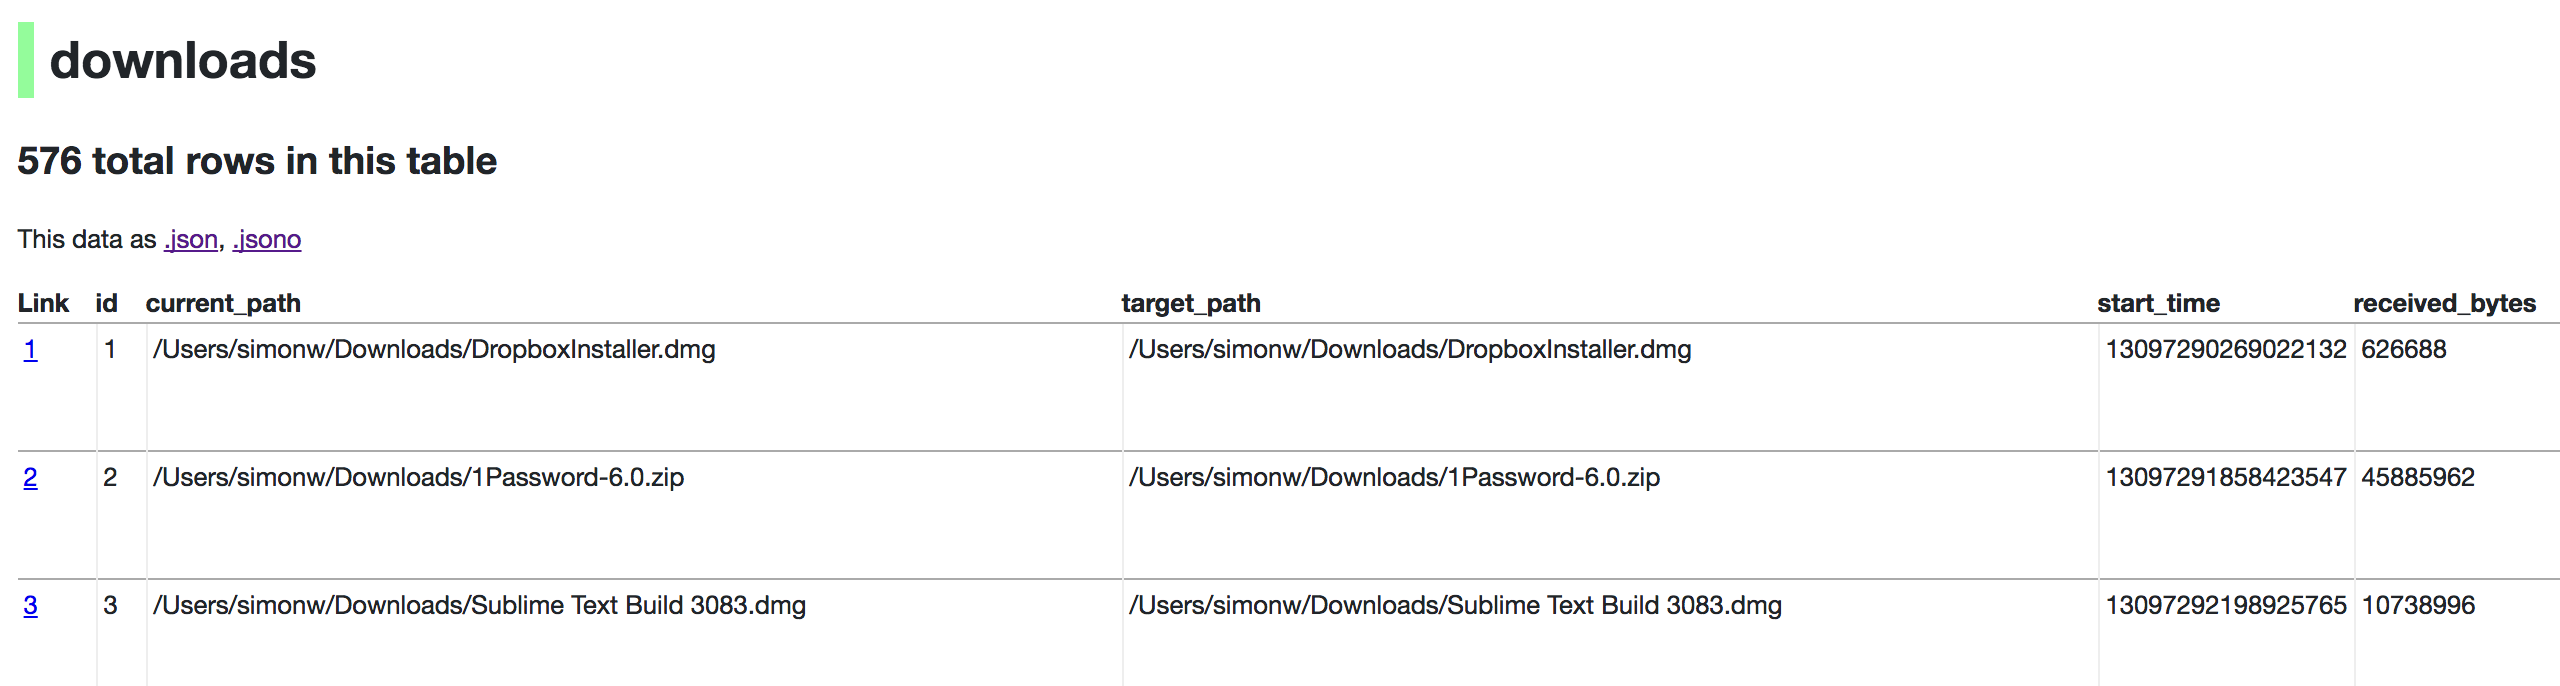 Downloads table rendered by datasette